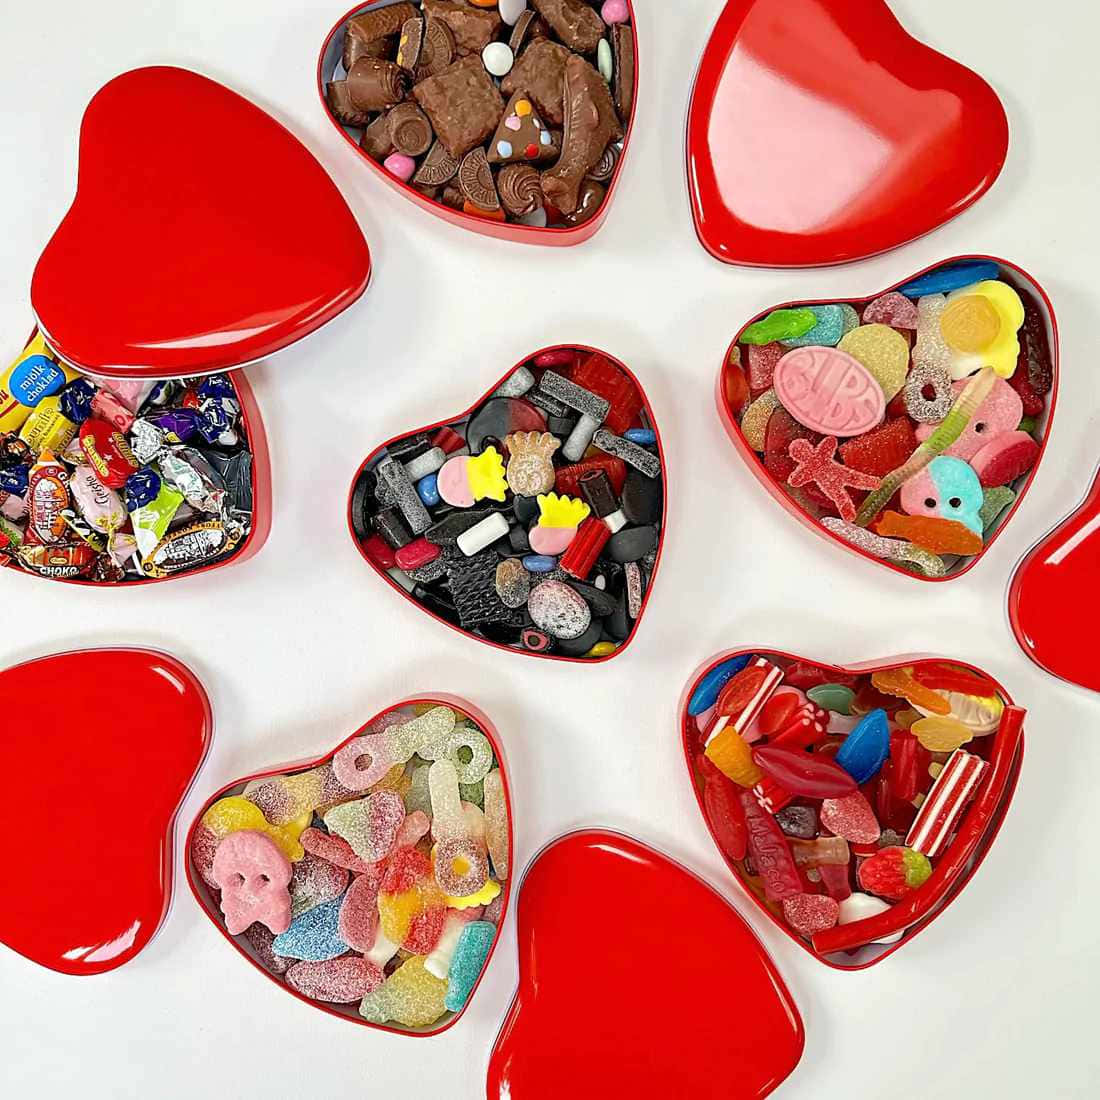 Heart Case Candies And Chocolate Valentine's Day Puctures 1100 x 1100 Picture